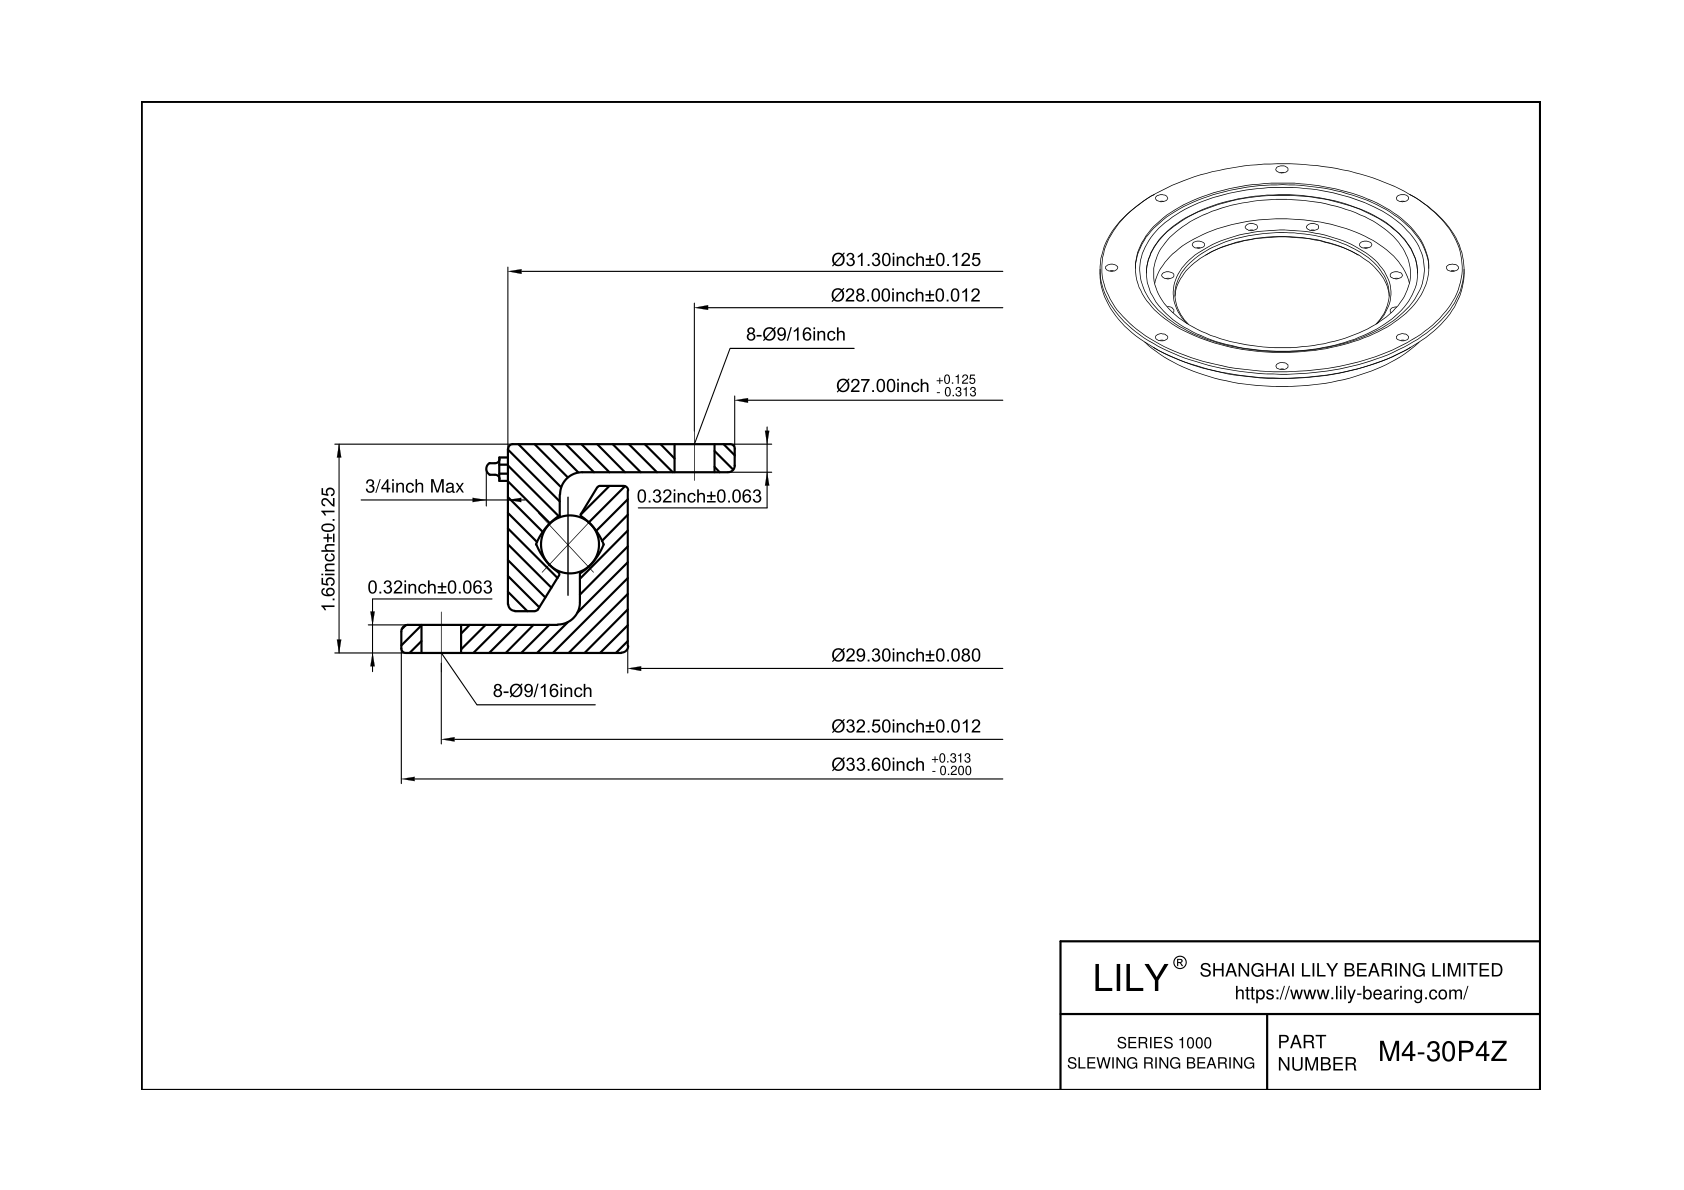 M4-30P4Z Developed For Use In Transport Vehicles cad drawing